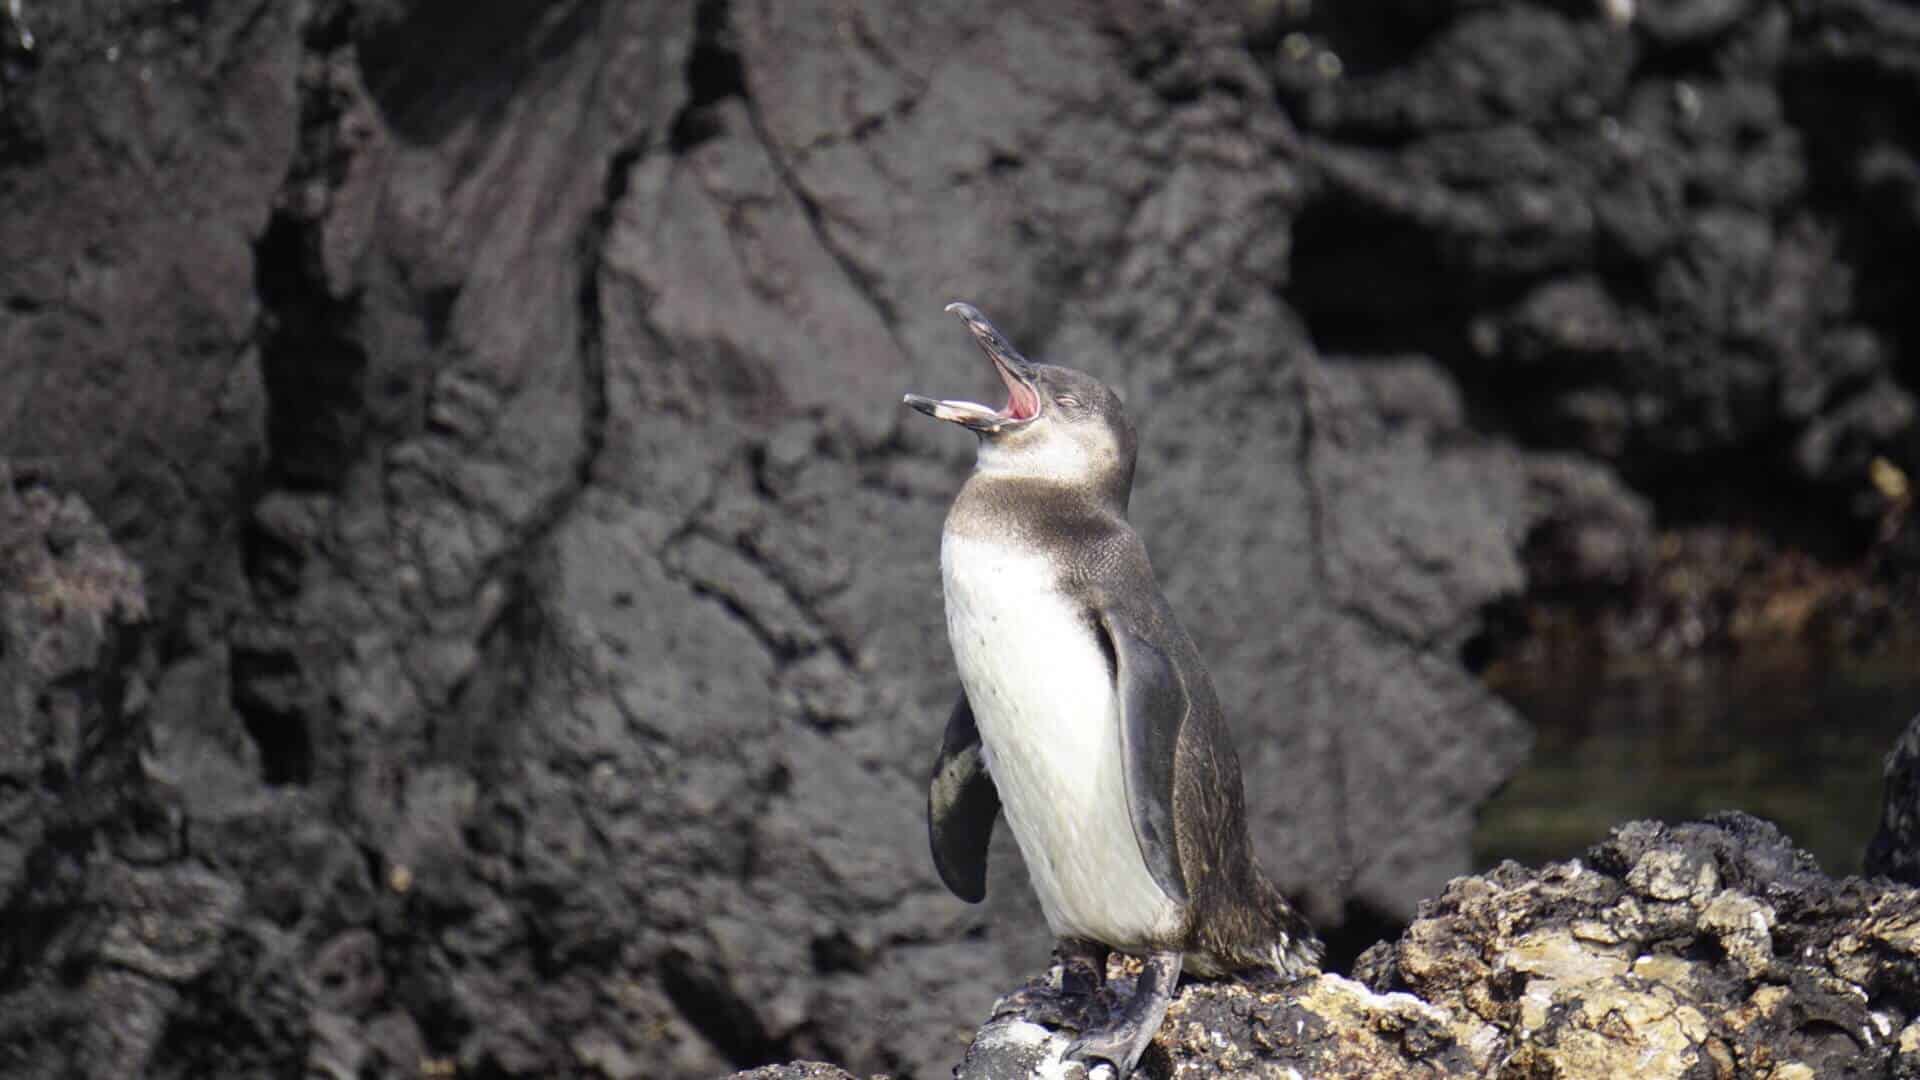 Galapagos penguin on a rock yawning, capturing a playful moment of one of the world's smallest penguin species found in the Galapagos Island